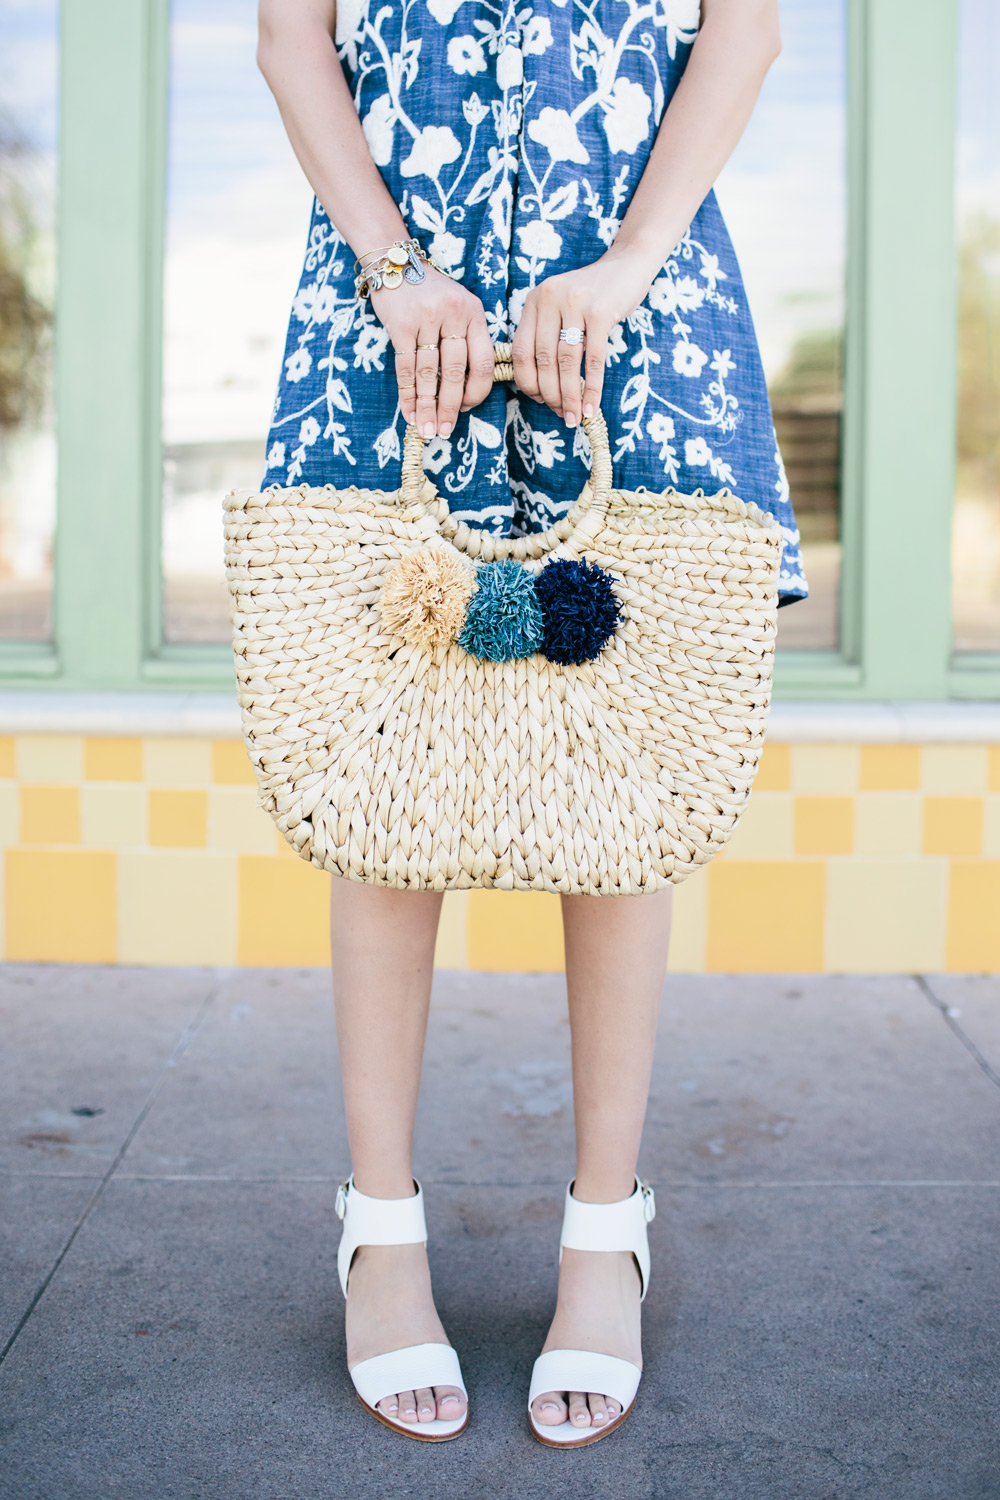 embroidered denim chambray dress pom straw tote spring outfit inspiration